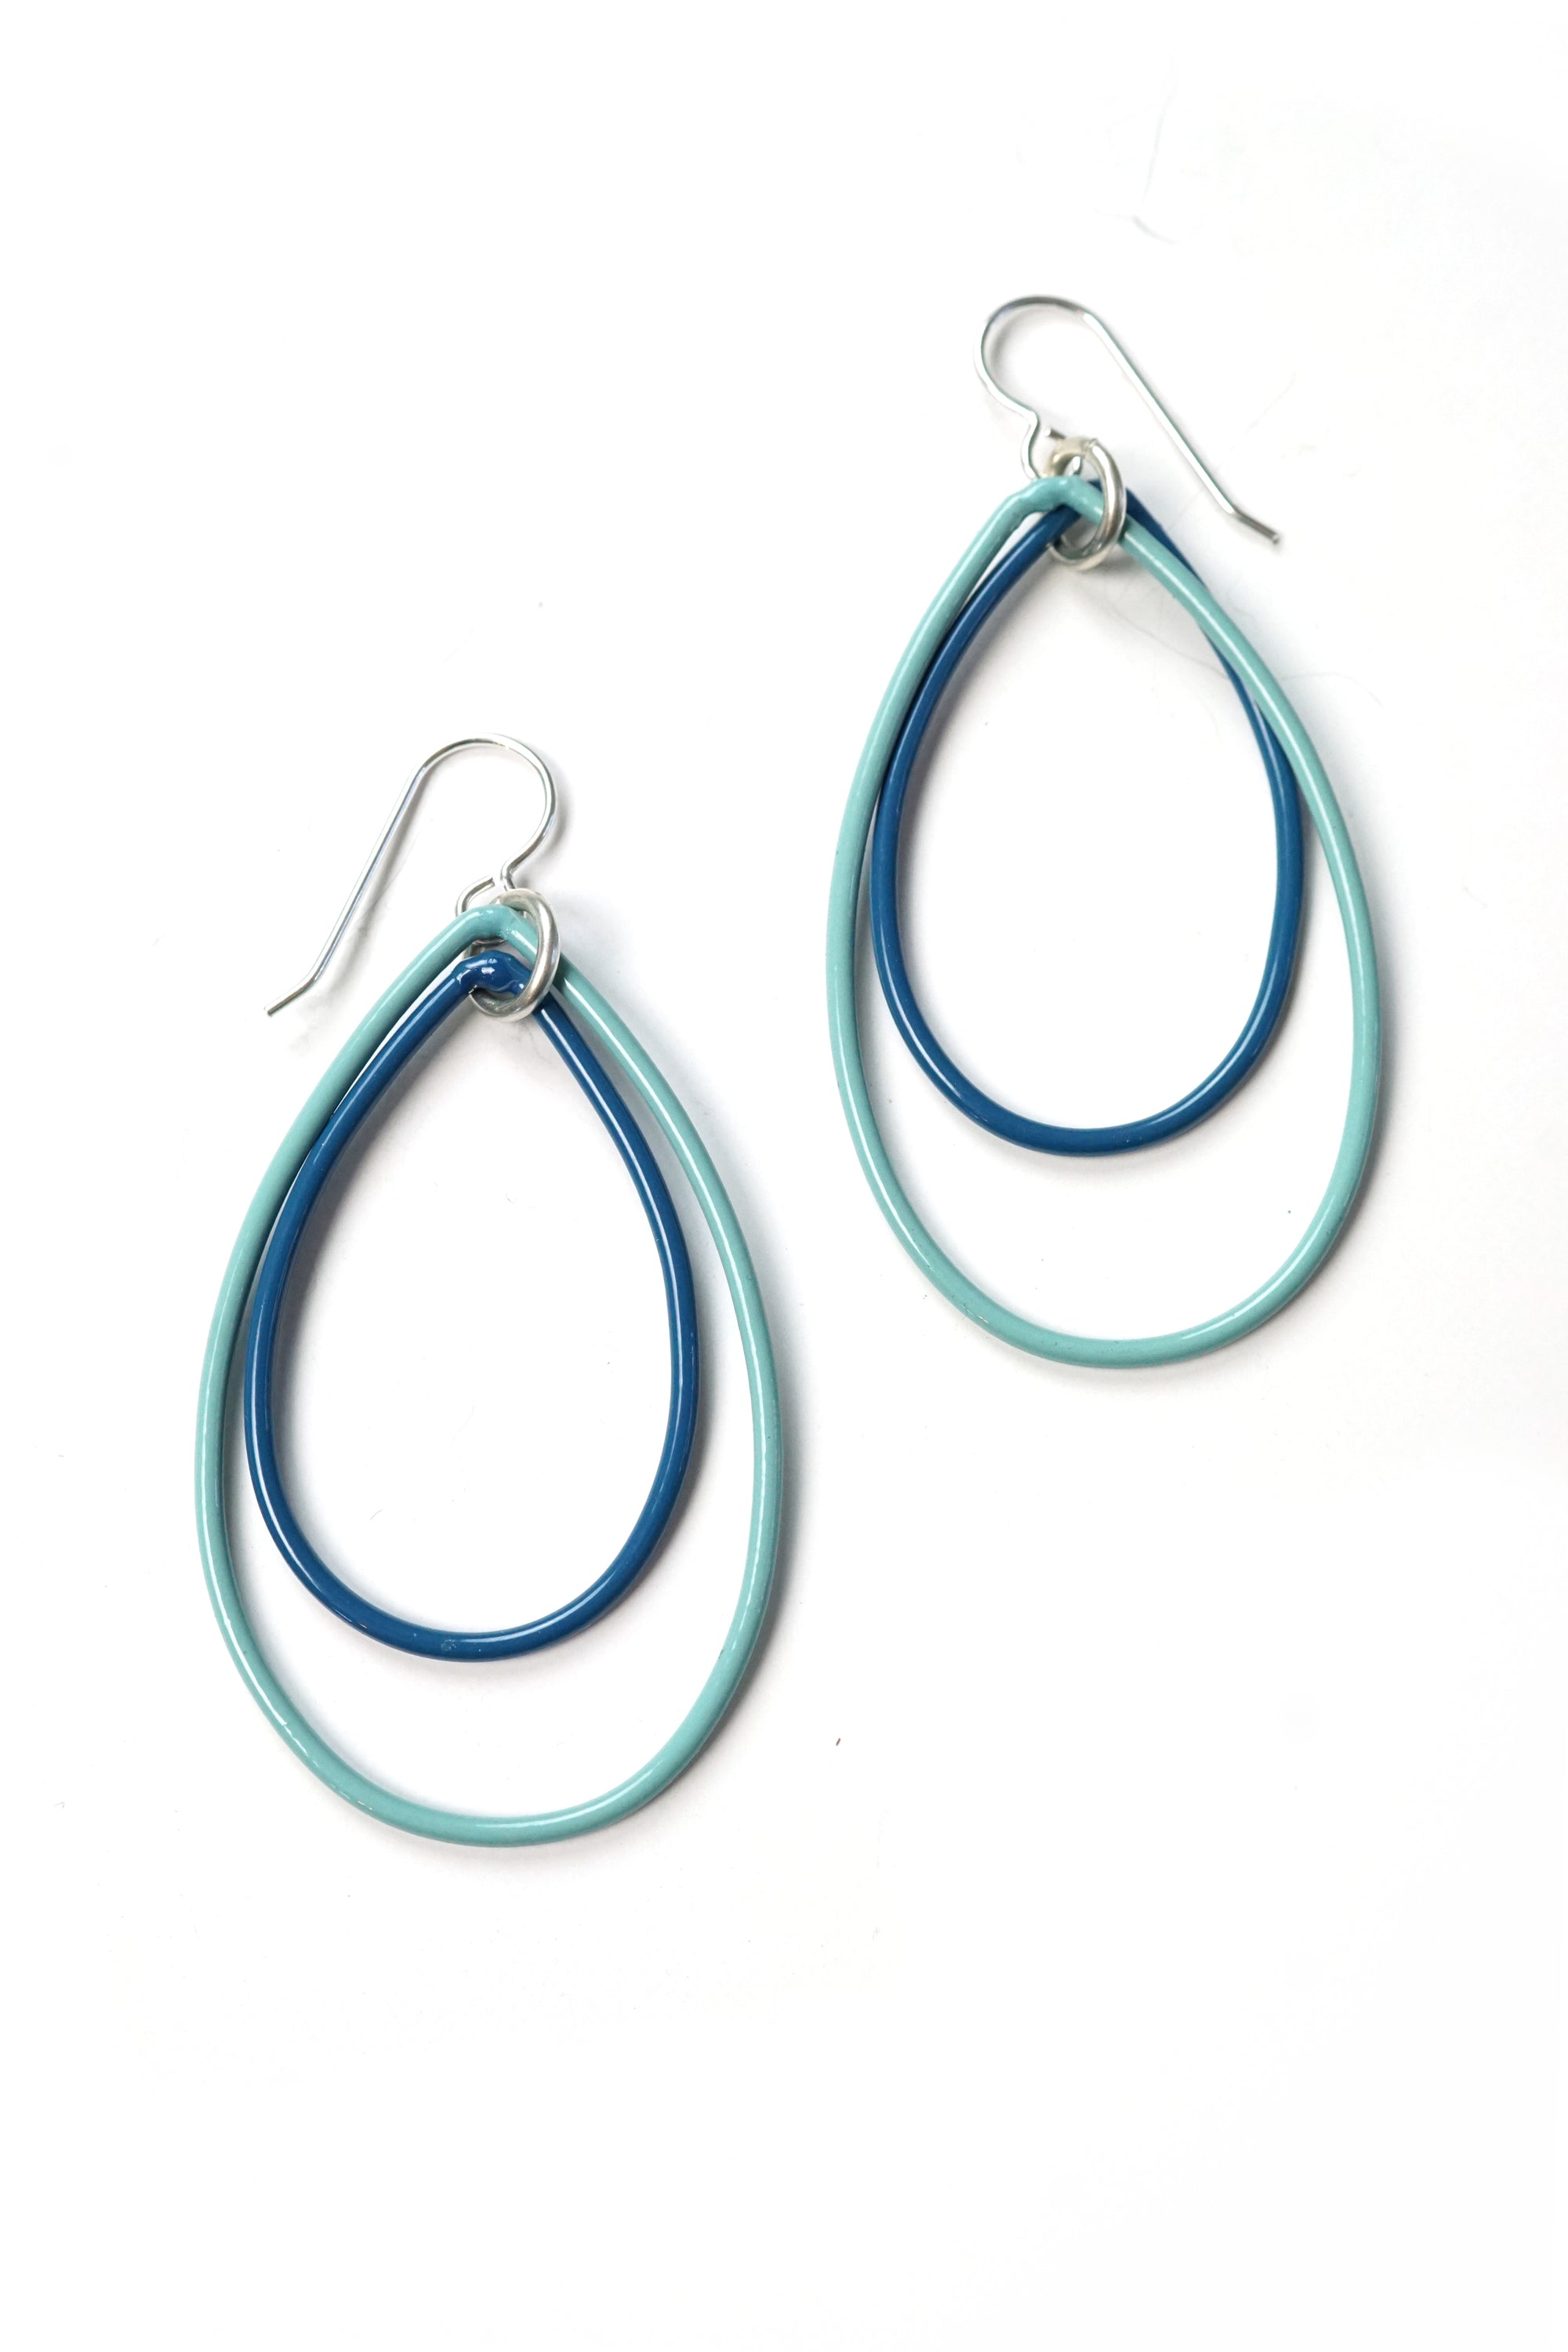 Eva earrings in Faded Teal and Azure Blue